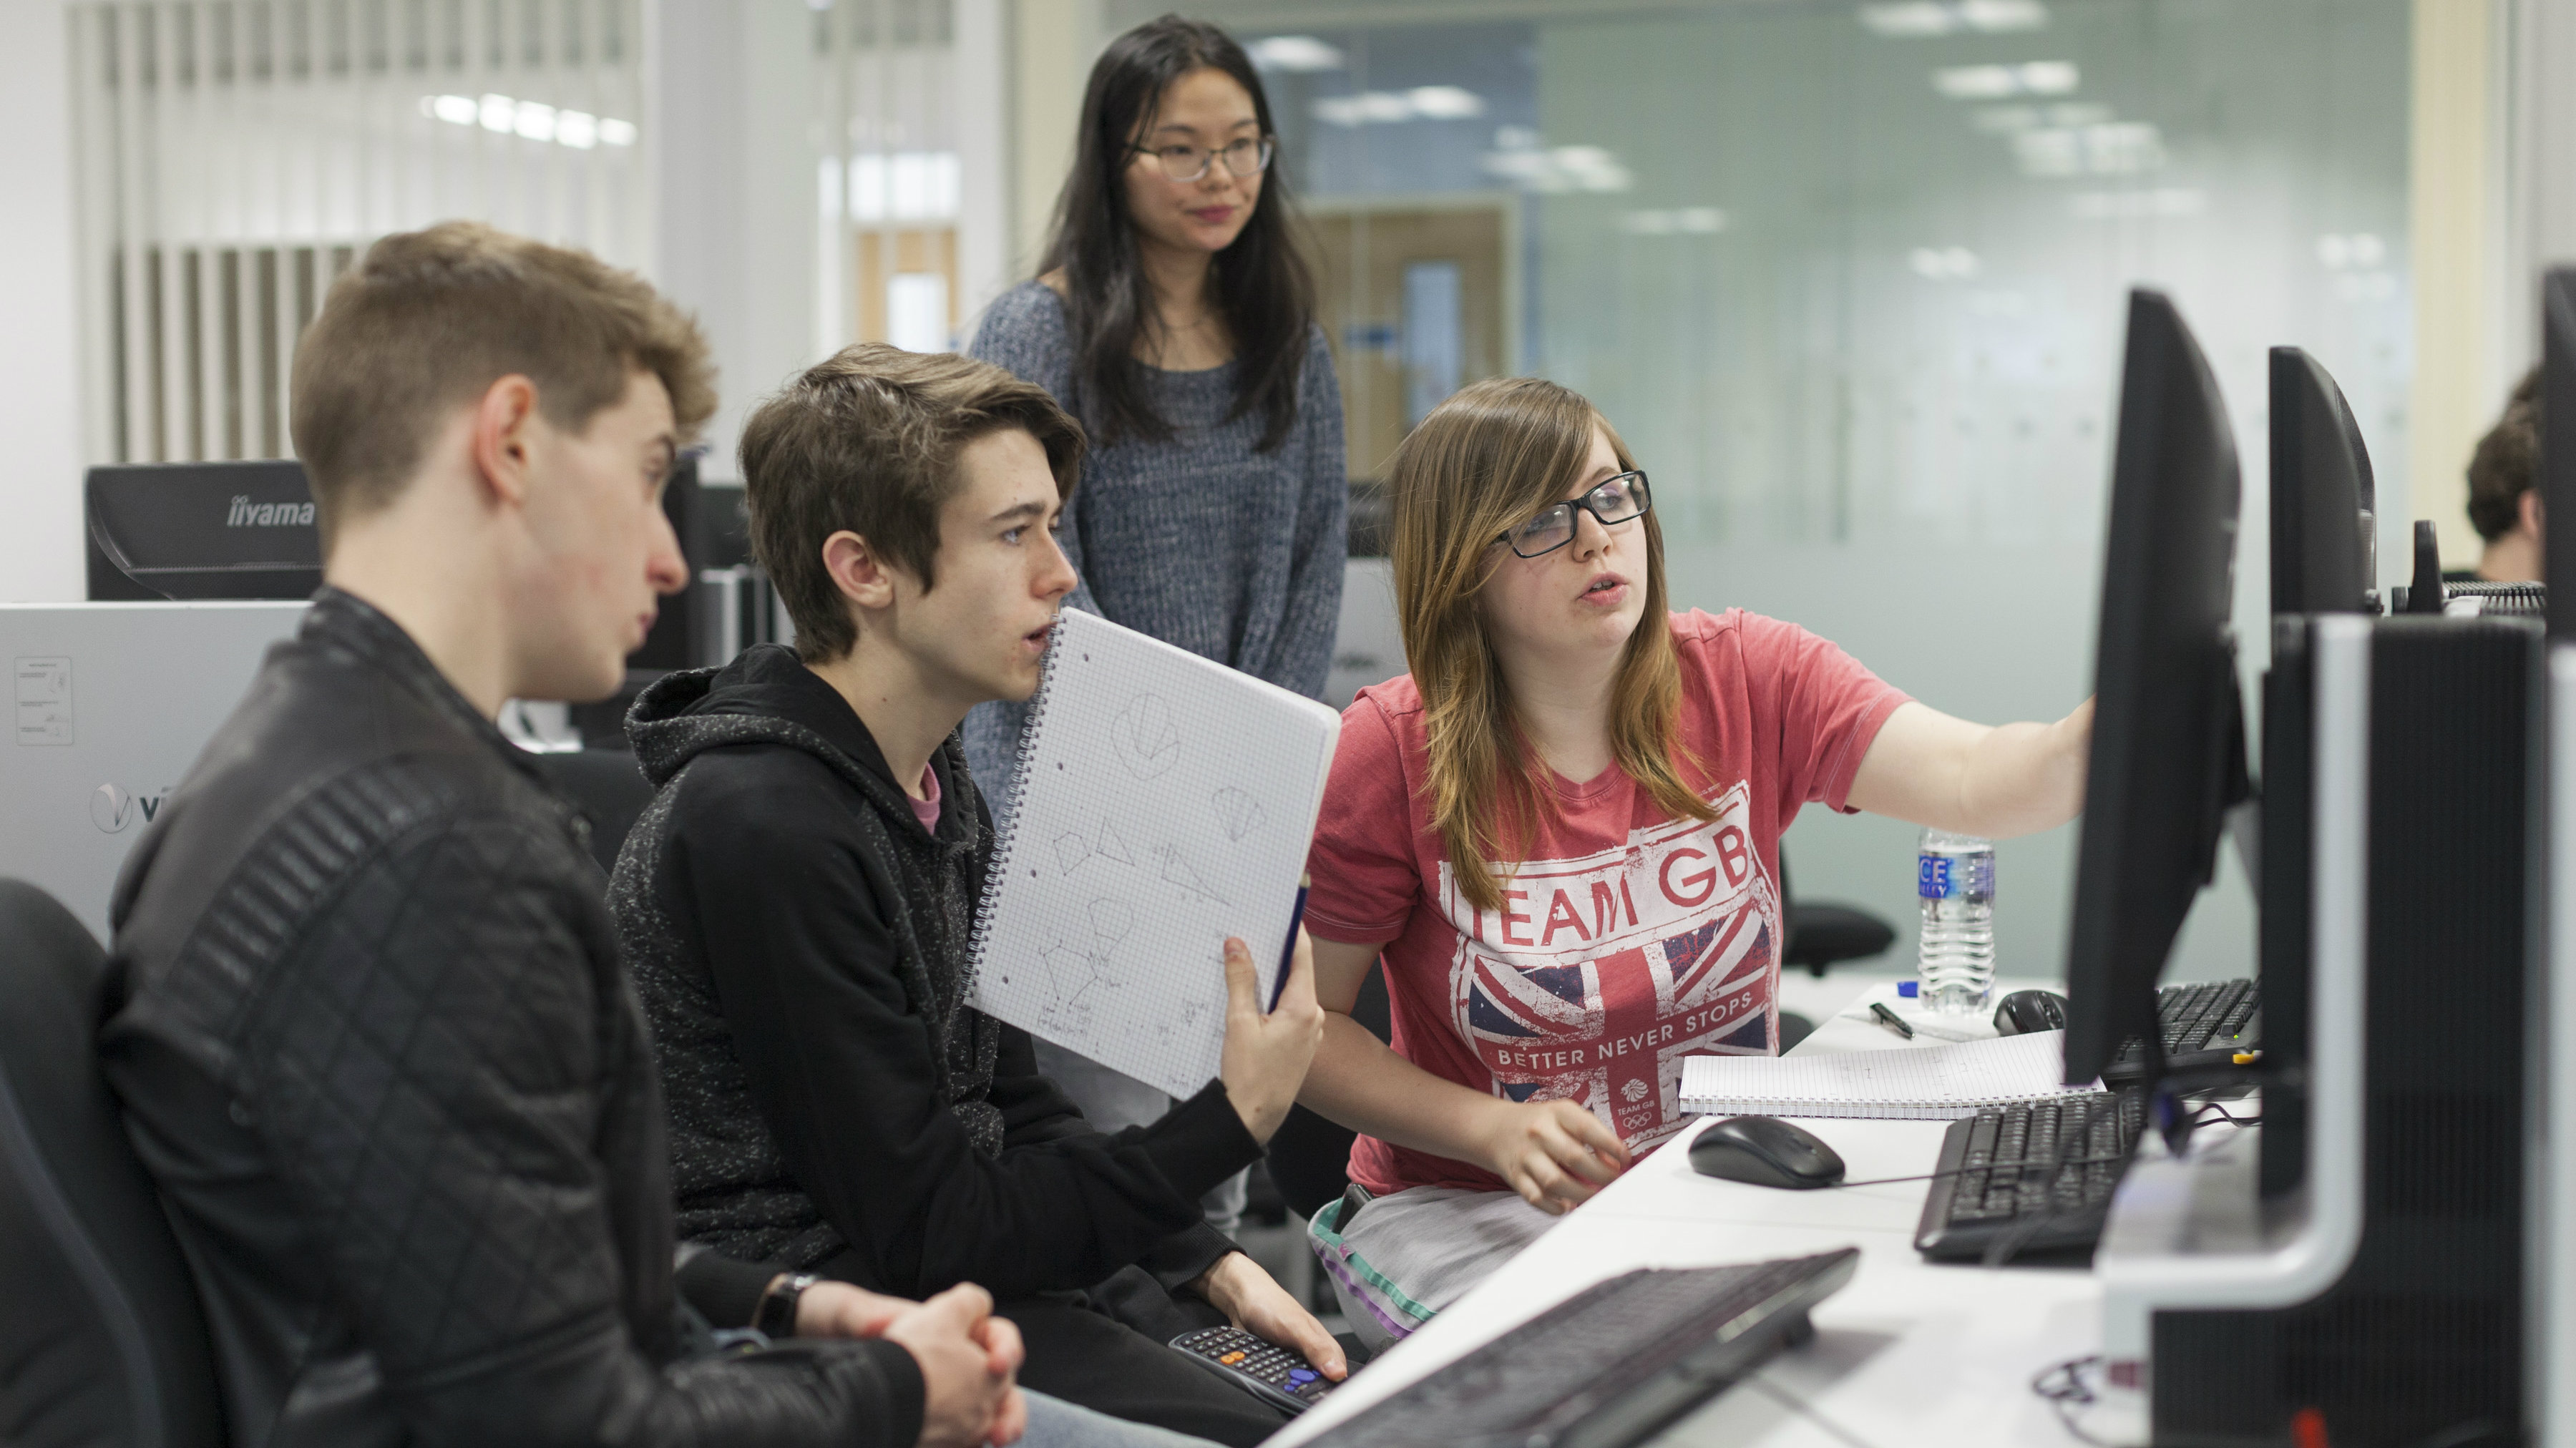 Two female and two male students huddled around two computer screens. The two young men, both of whom are wearing black, are sat down next to a young lady wearing a red Team GB t-shirt. The other young lady is stood up wearing a blue long-sleeved jumper.